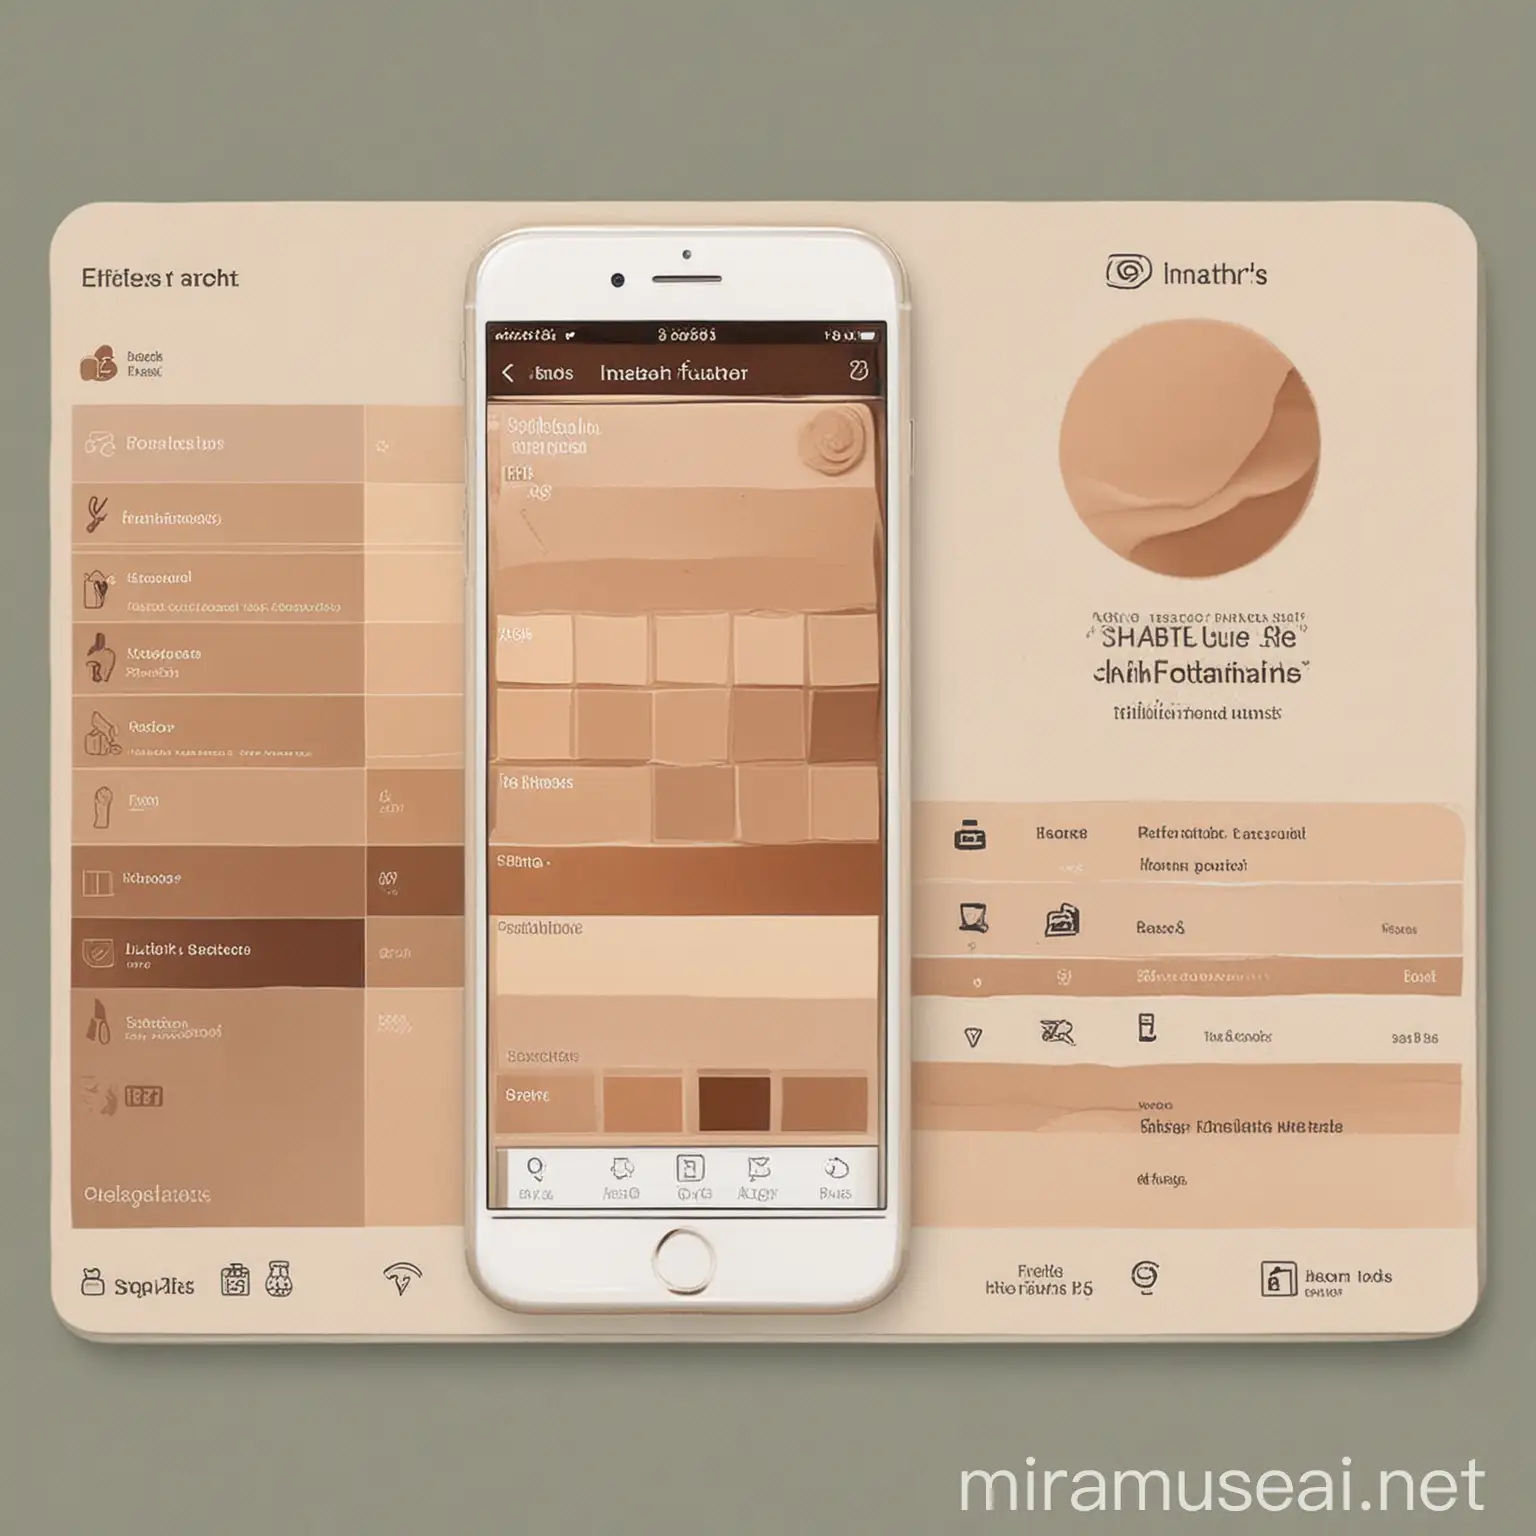 create a instagram infographic that shows an app which will be used for shade matching foundations and skin concerns.